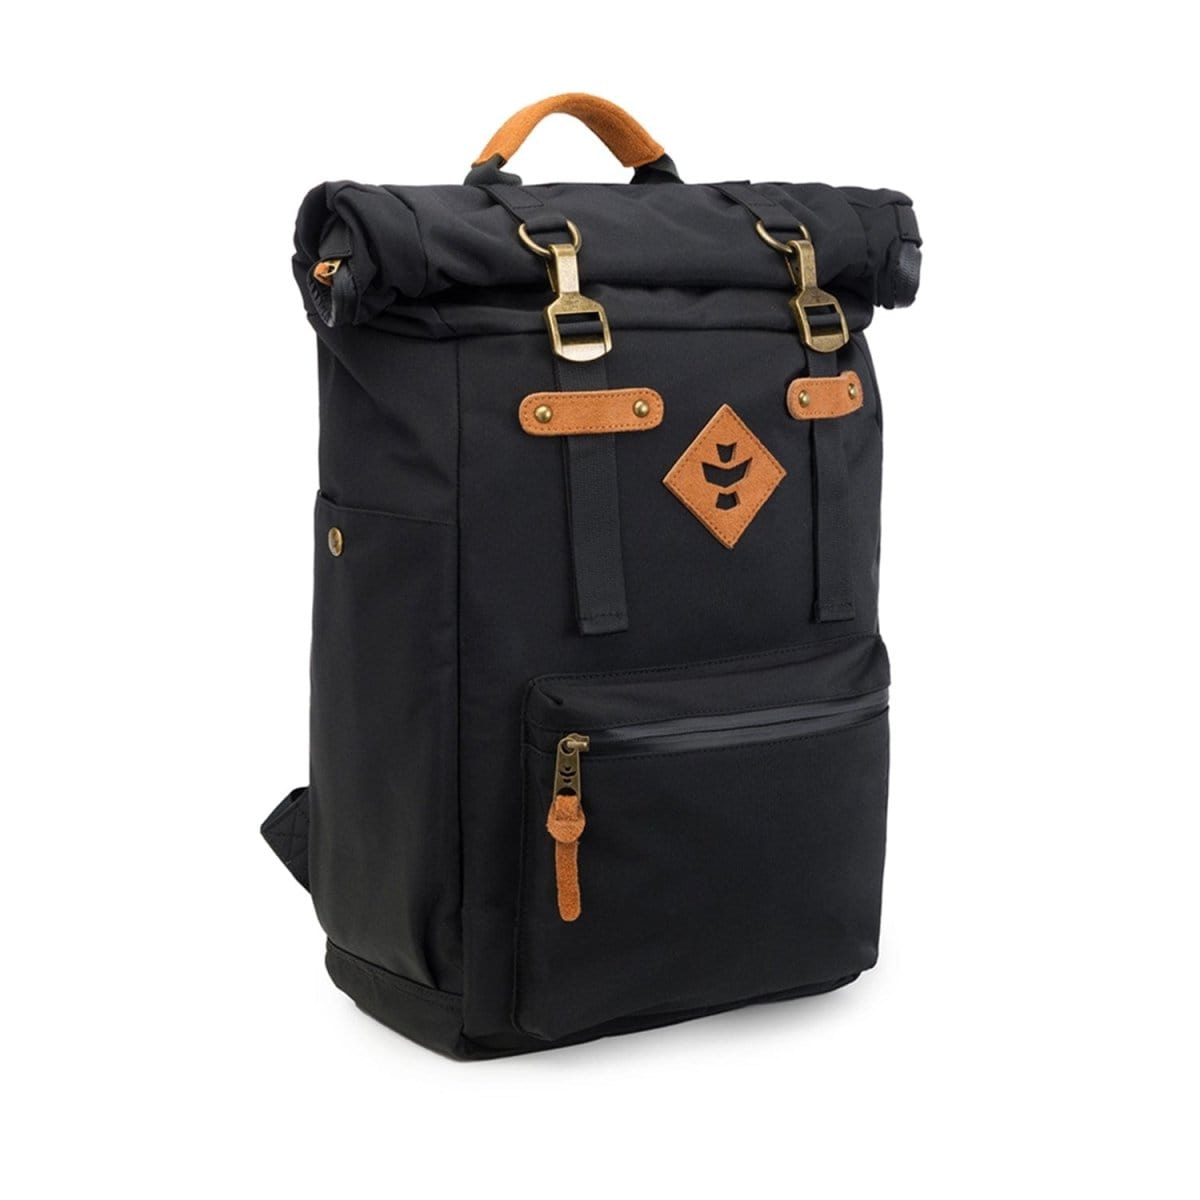 Revelry Supply Travel Bag Black The Drifter - Smell Proof Rolltop Backpack